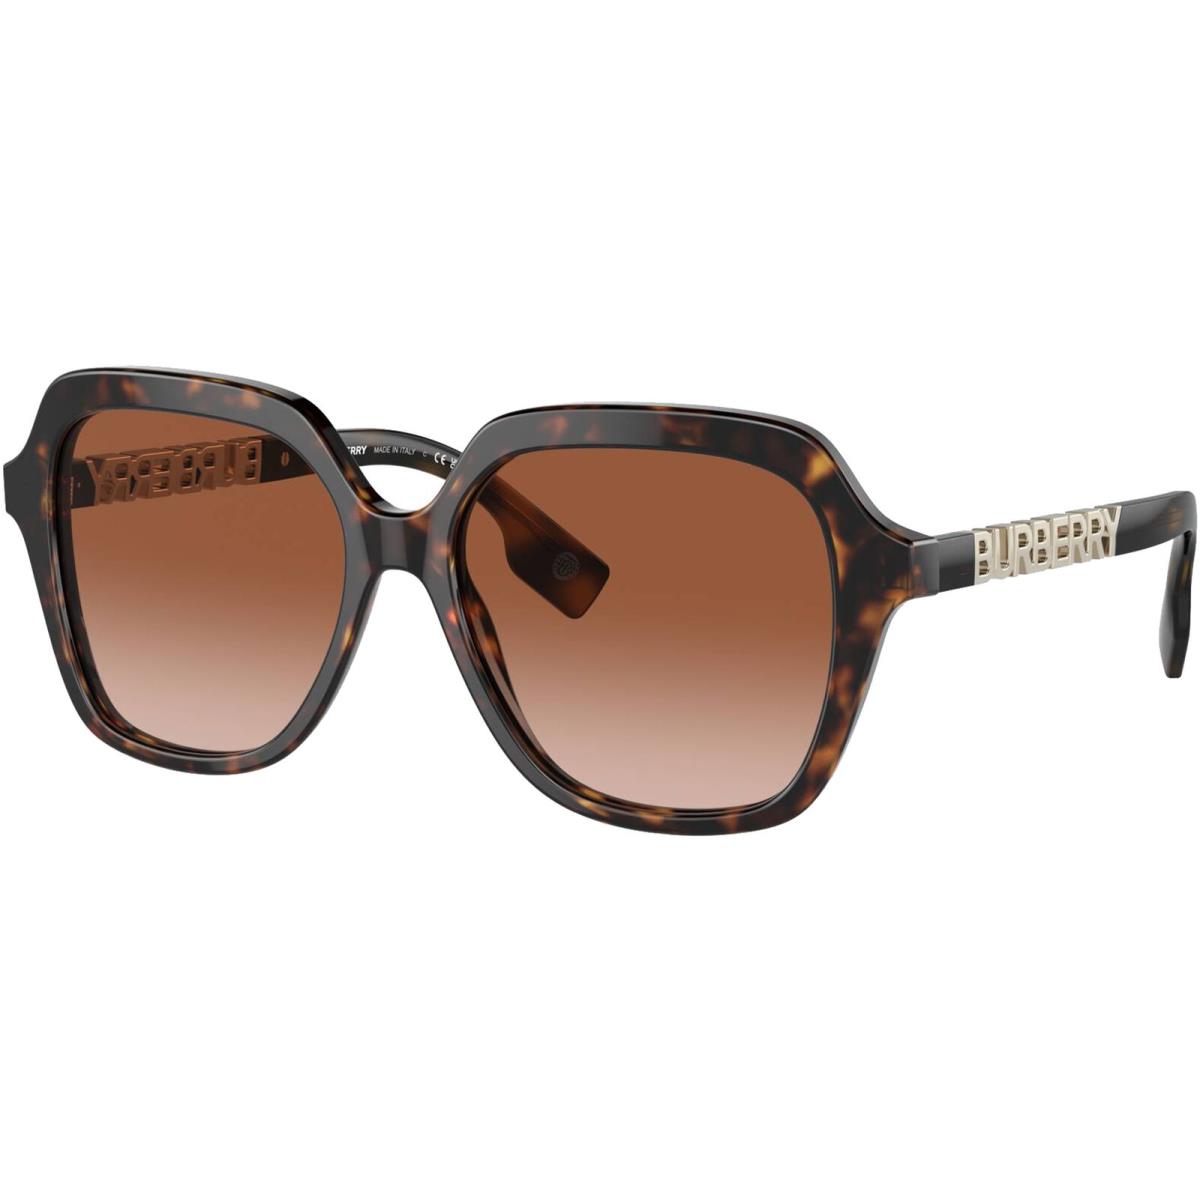 Burberry Joni Women`s Butterfly Sunglasses - BE4389 - Made in Italy - Frame: